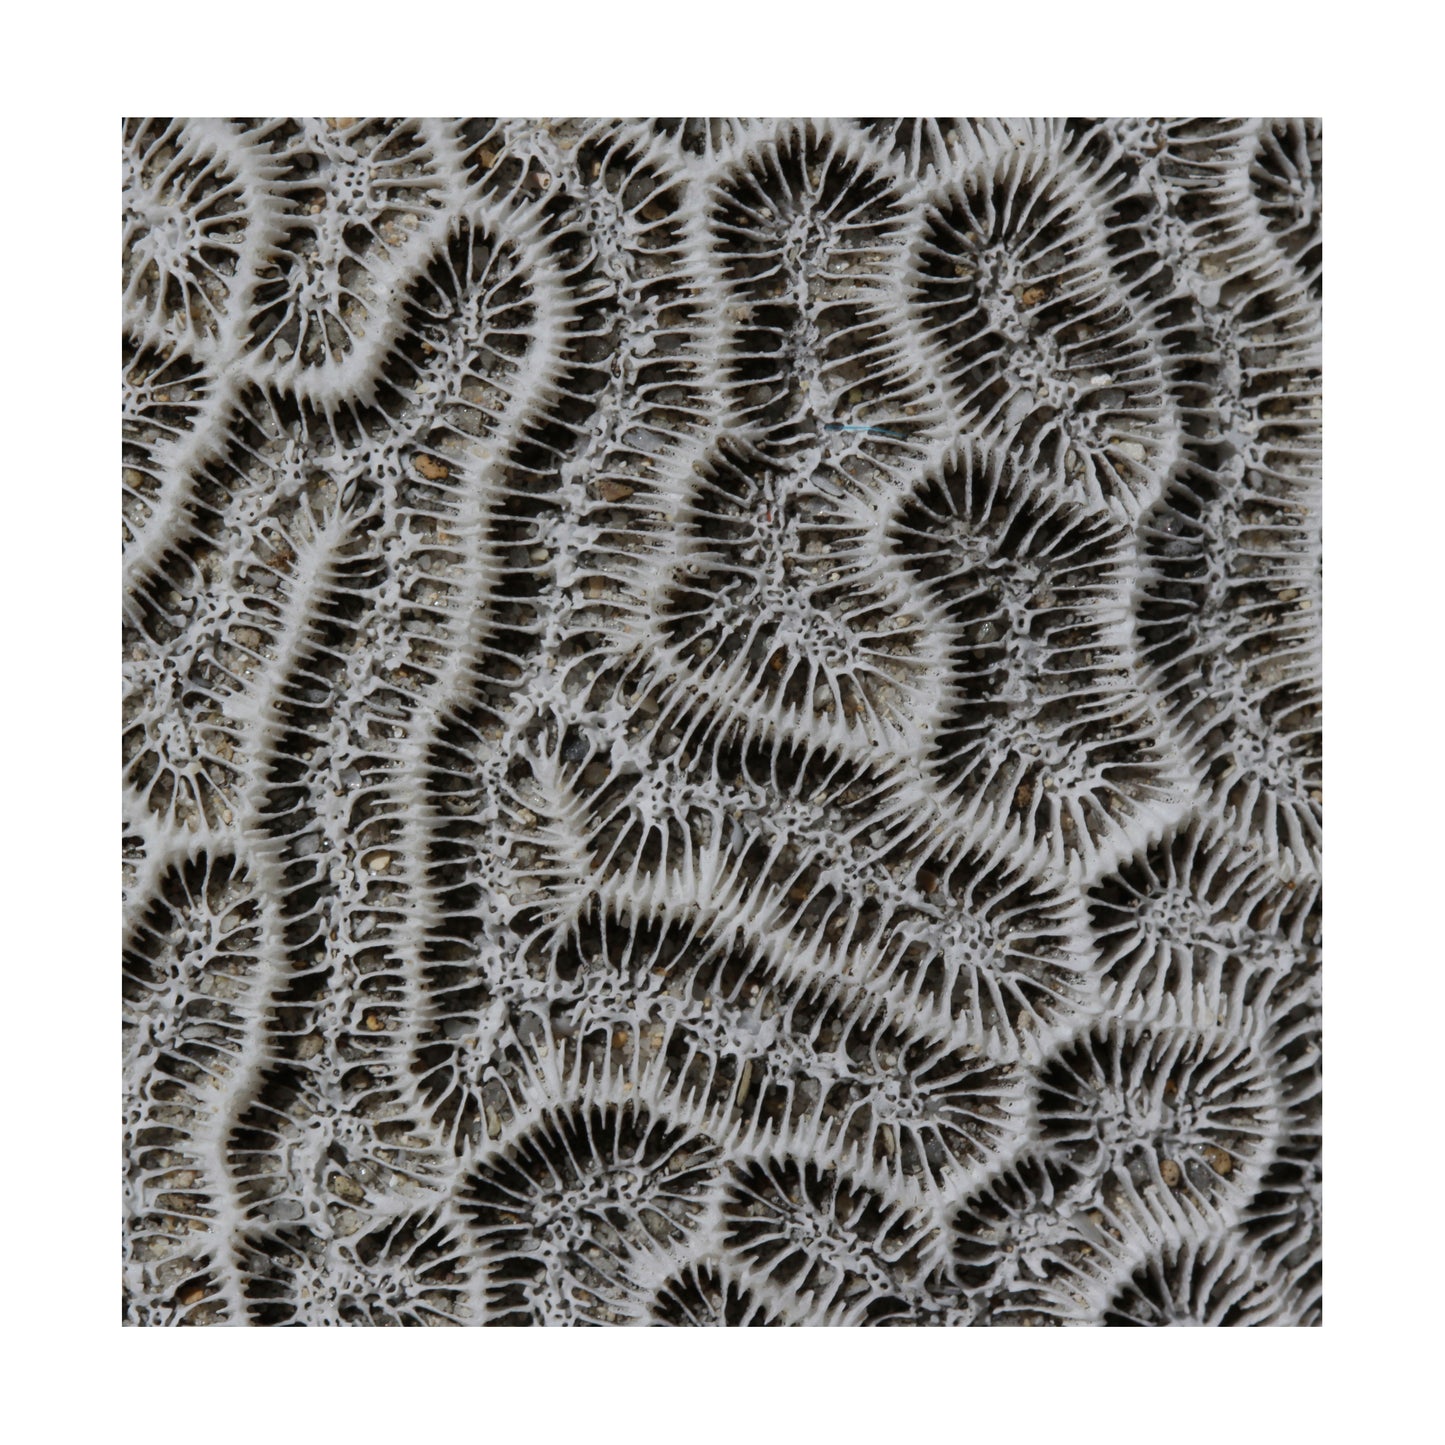 Brain Coral Photograph by Frederick Kinski - 8.75" x 8.75" - Mounted in Acrylic